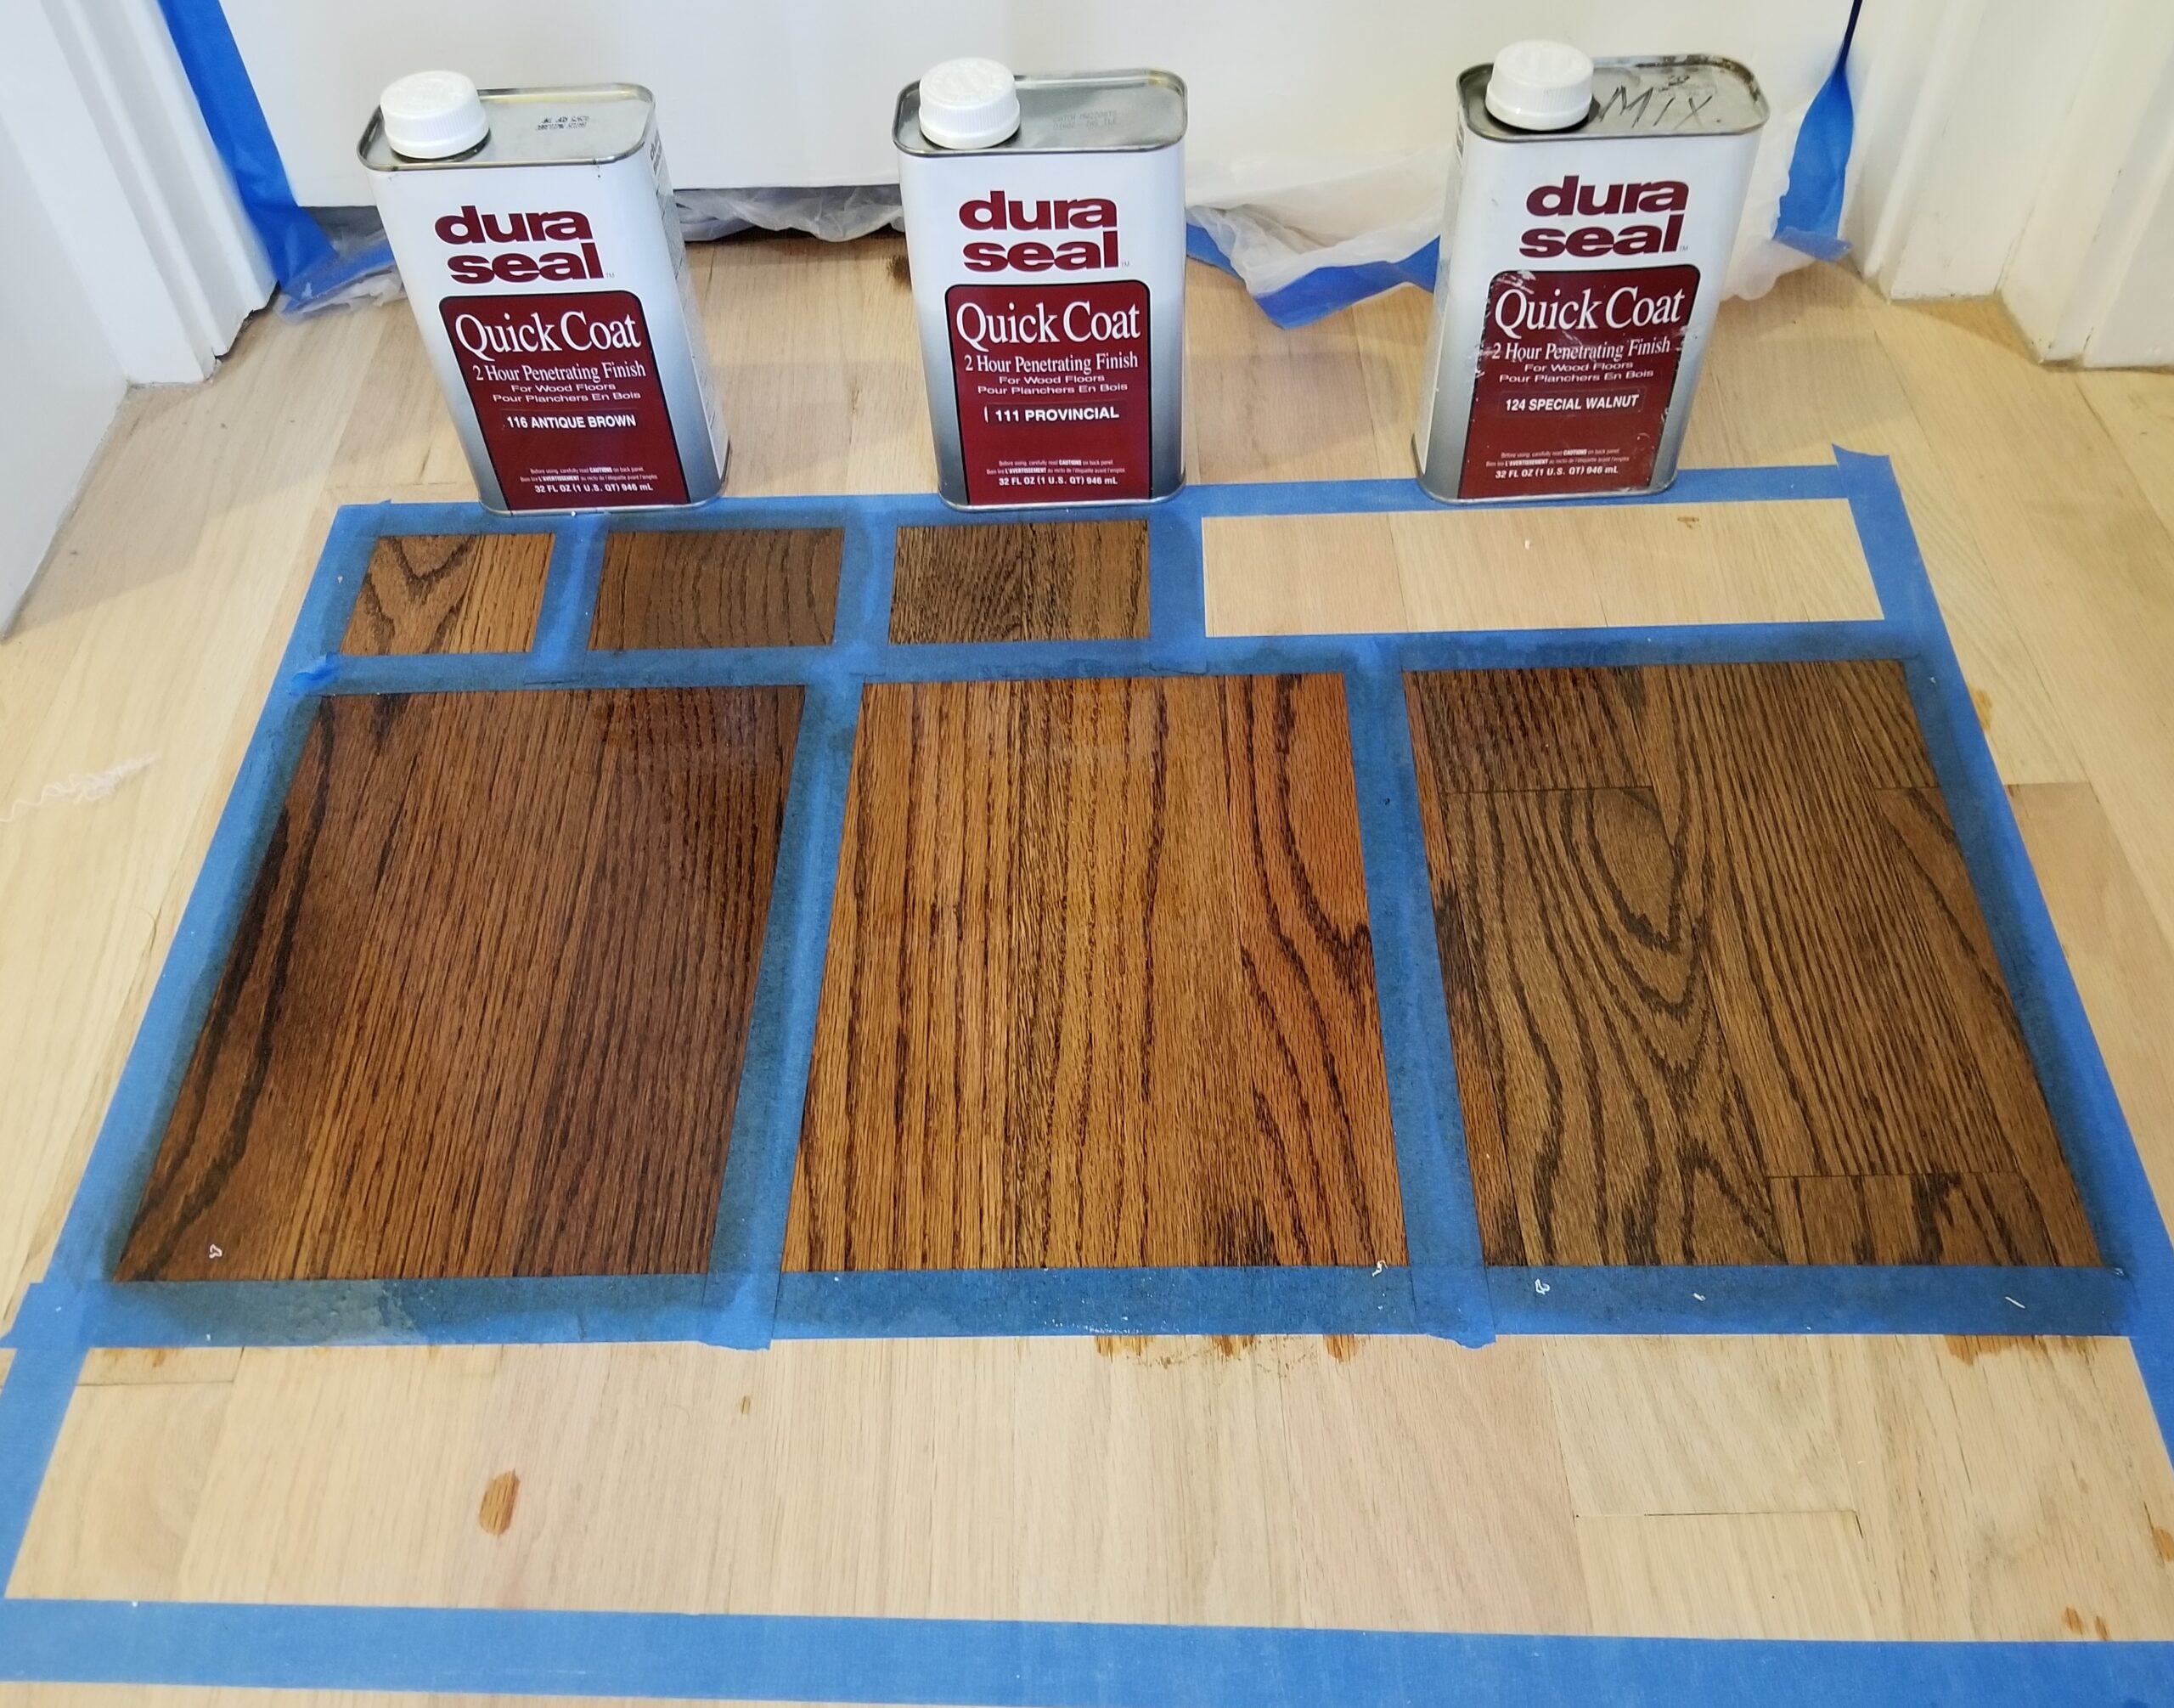 Performing stain mockups helped this Palo Alto homeowner confidently choosea stain with no buyer's regret. 